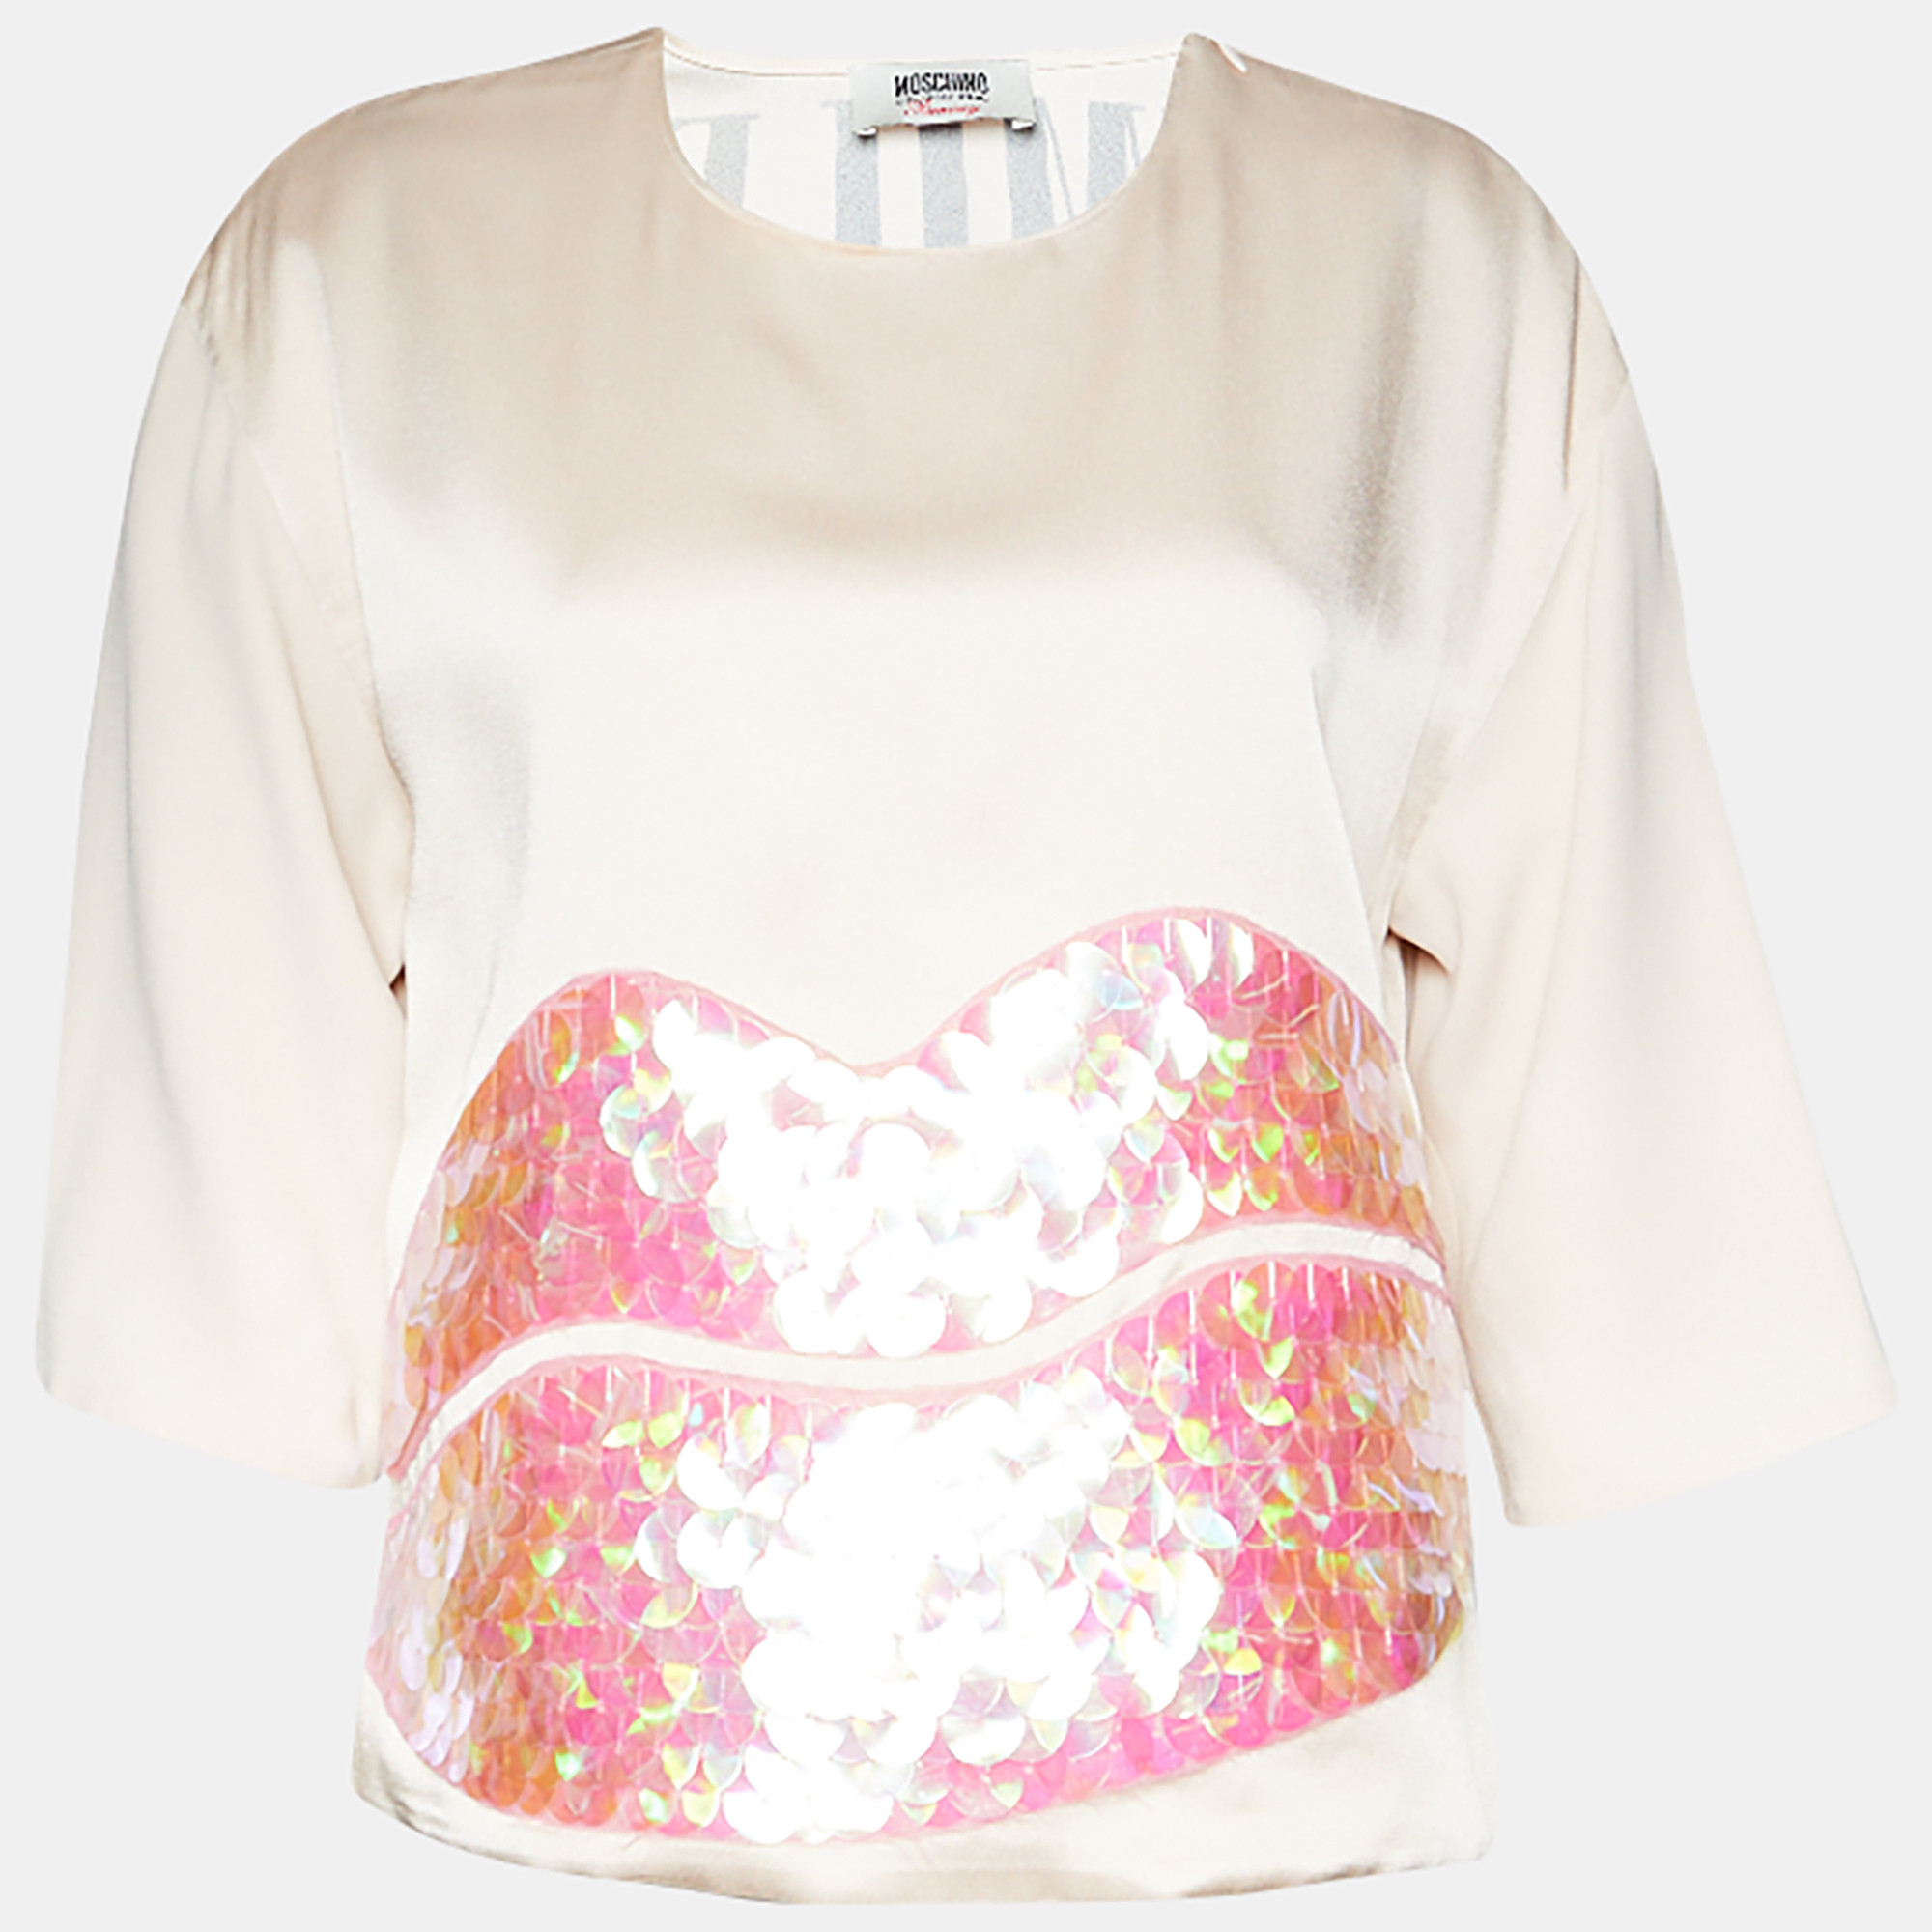 Moschino Cheap And Chic Light Pink Satin Lip Sequin Embellished Top M